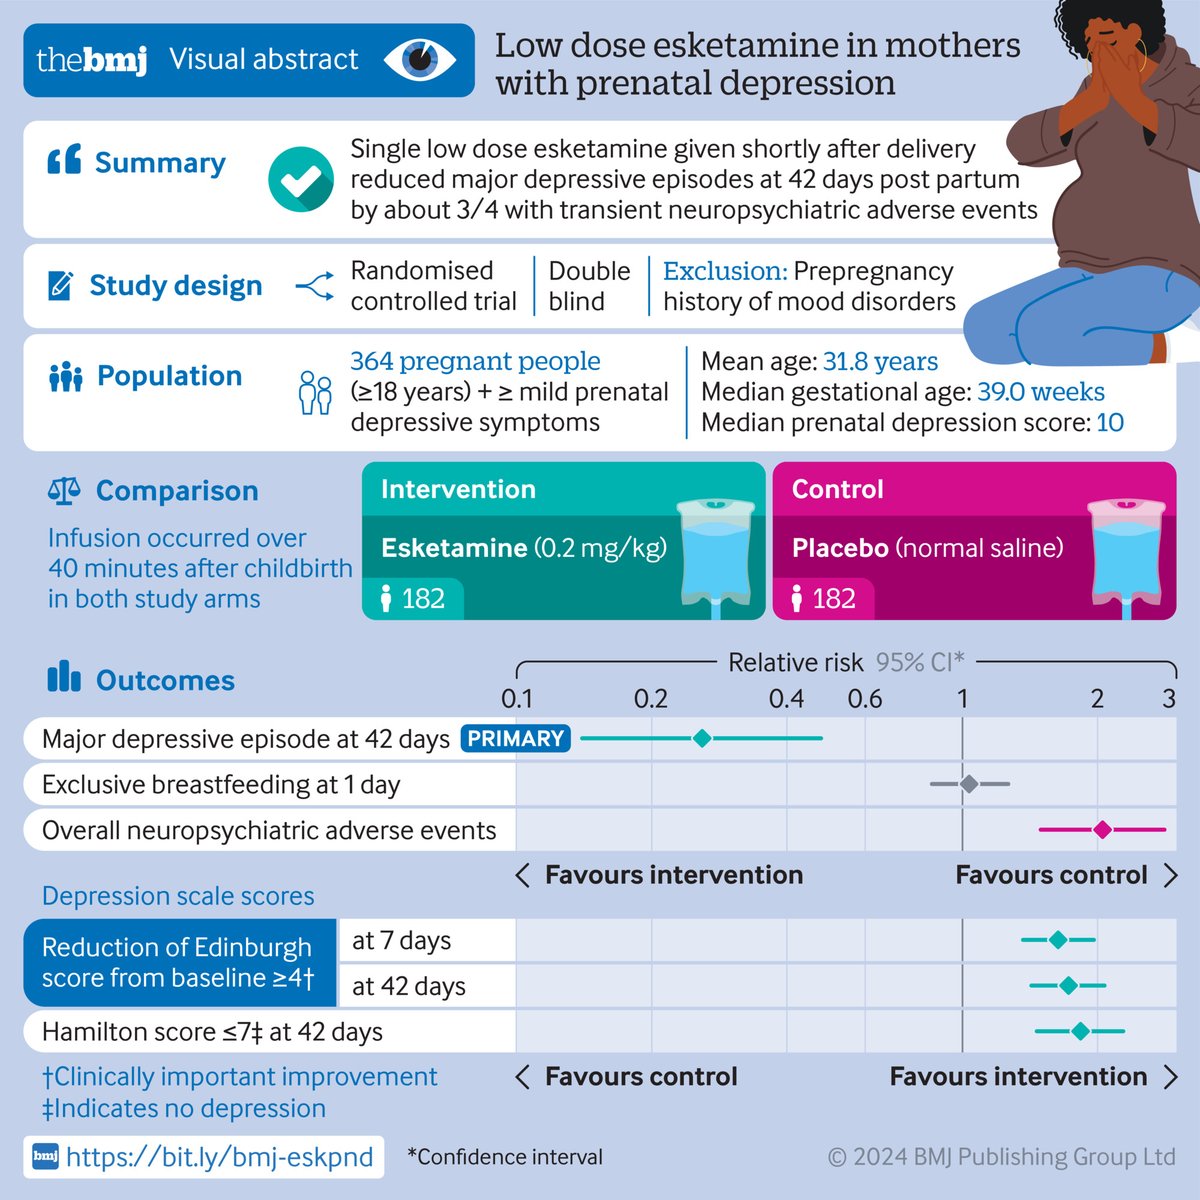 NEW #BMJResearch: A single low dose injection of esketamine given immediately after childbirth reduces major depressive episodes in individuals with prenatal depression, finds study. 

Check out our visual abstract for a summary #BMJInfographic
🔗  bmj.com/content/385/bm…